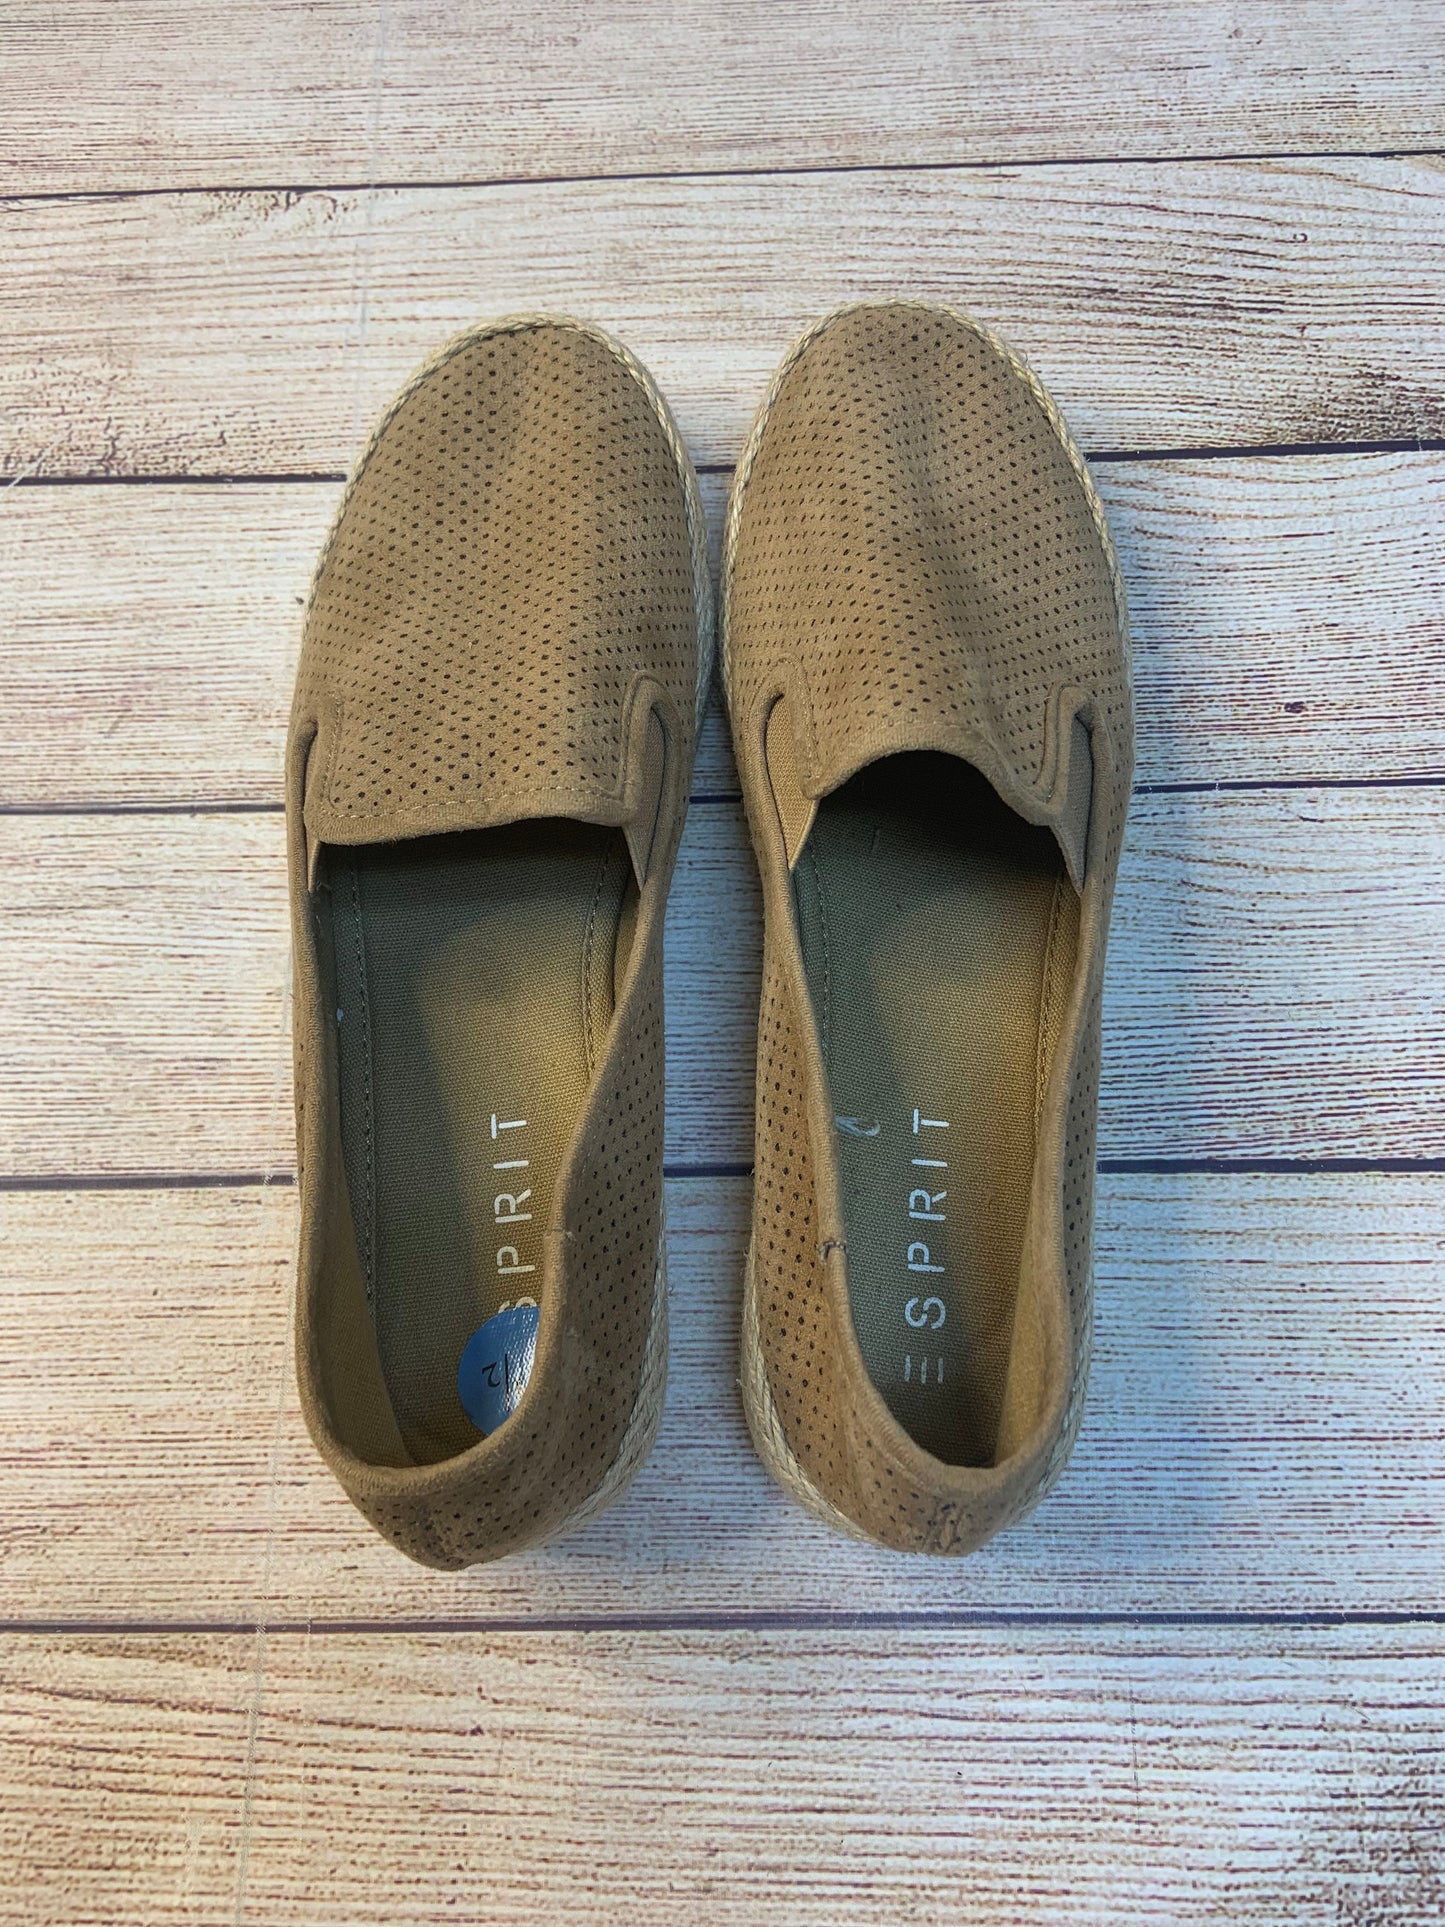 Shoes Flats Boat By Esprit  Size: 7.5